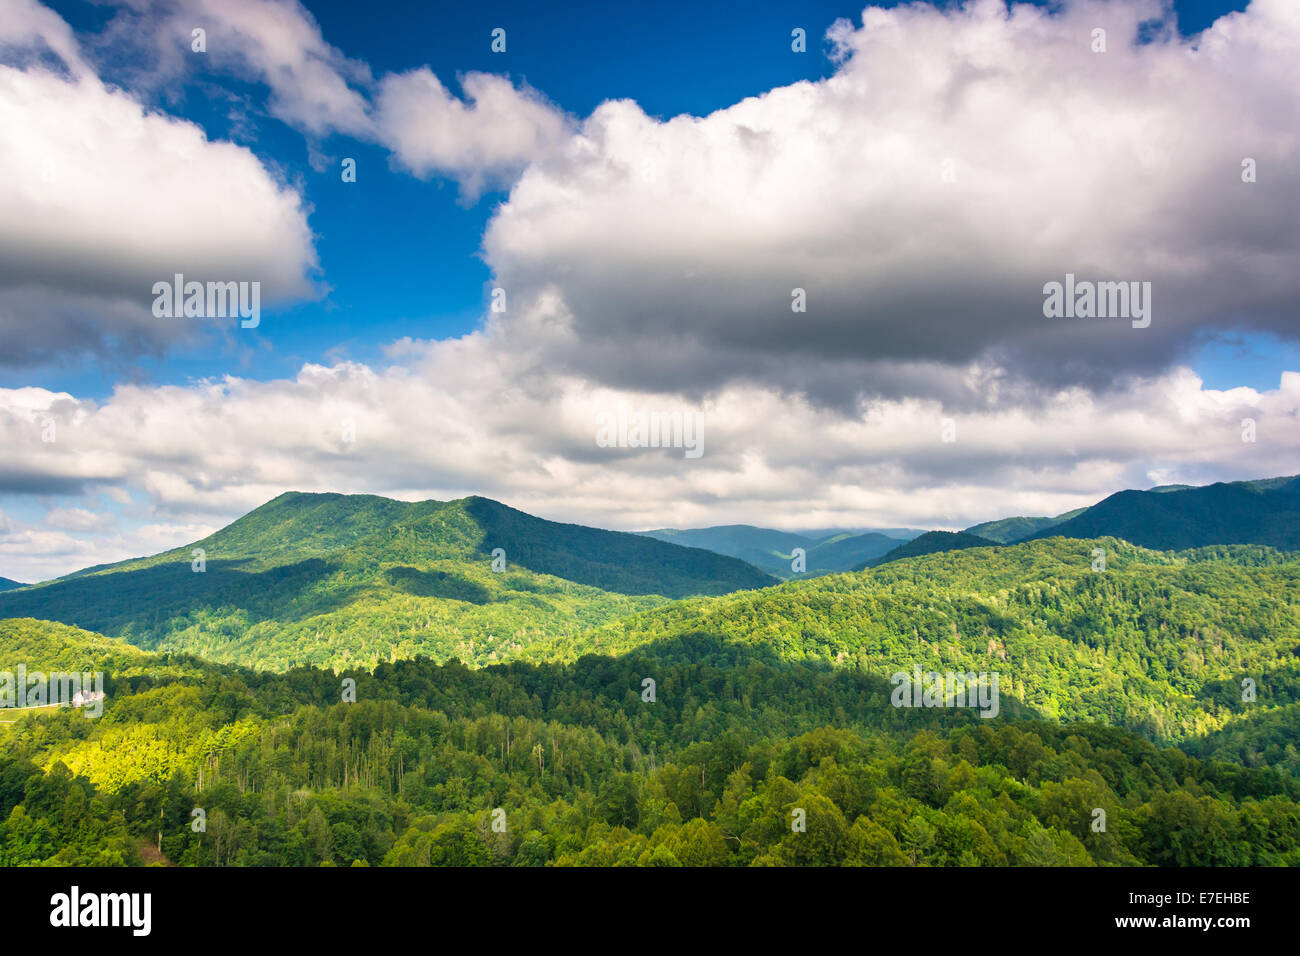 View of the Appalachians from Bald Mountain Ridge scenic overlook along I-26 in Tennessee. Stock Photo